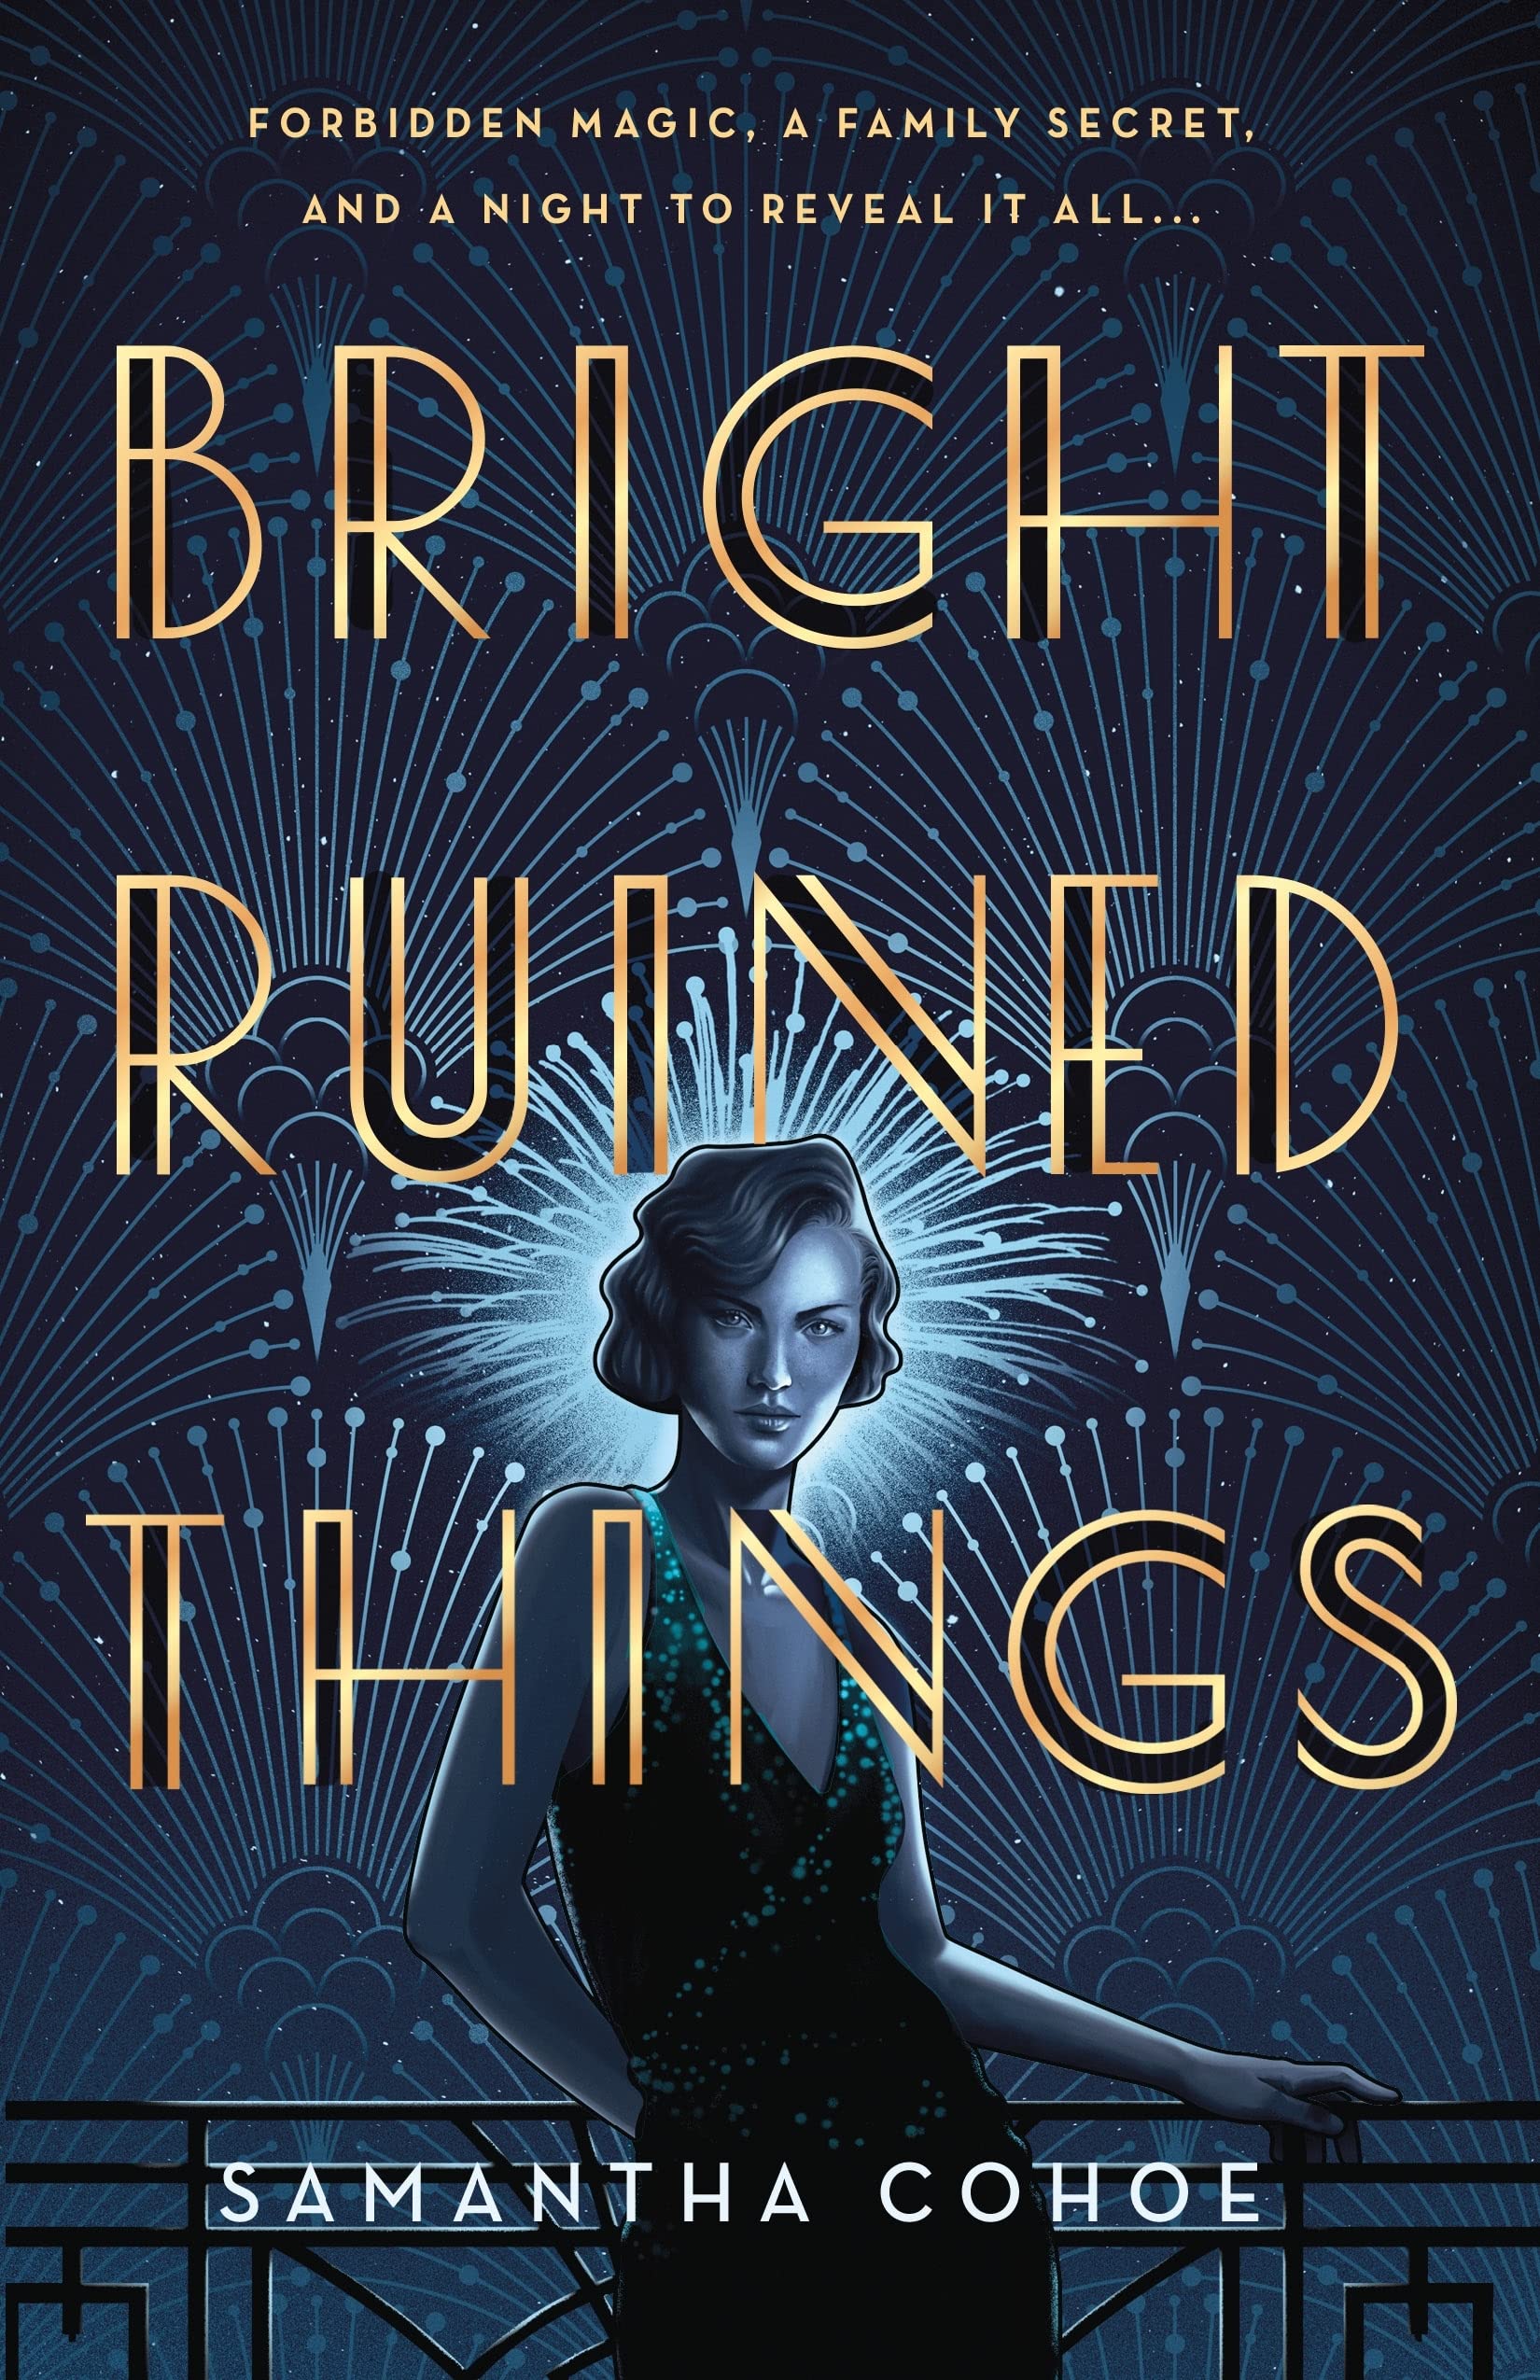 Cover of “Bright Ruined Things” by Samantha Cohoe